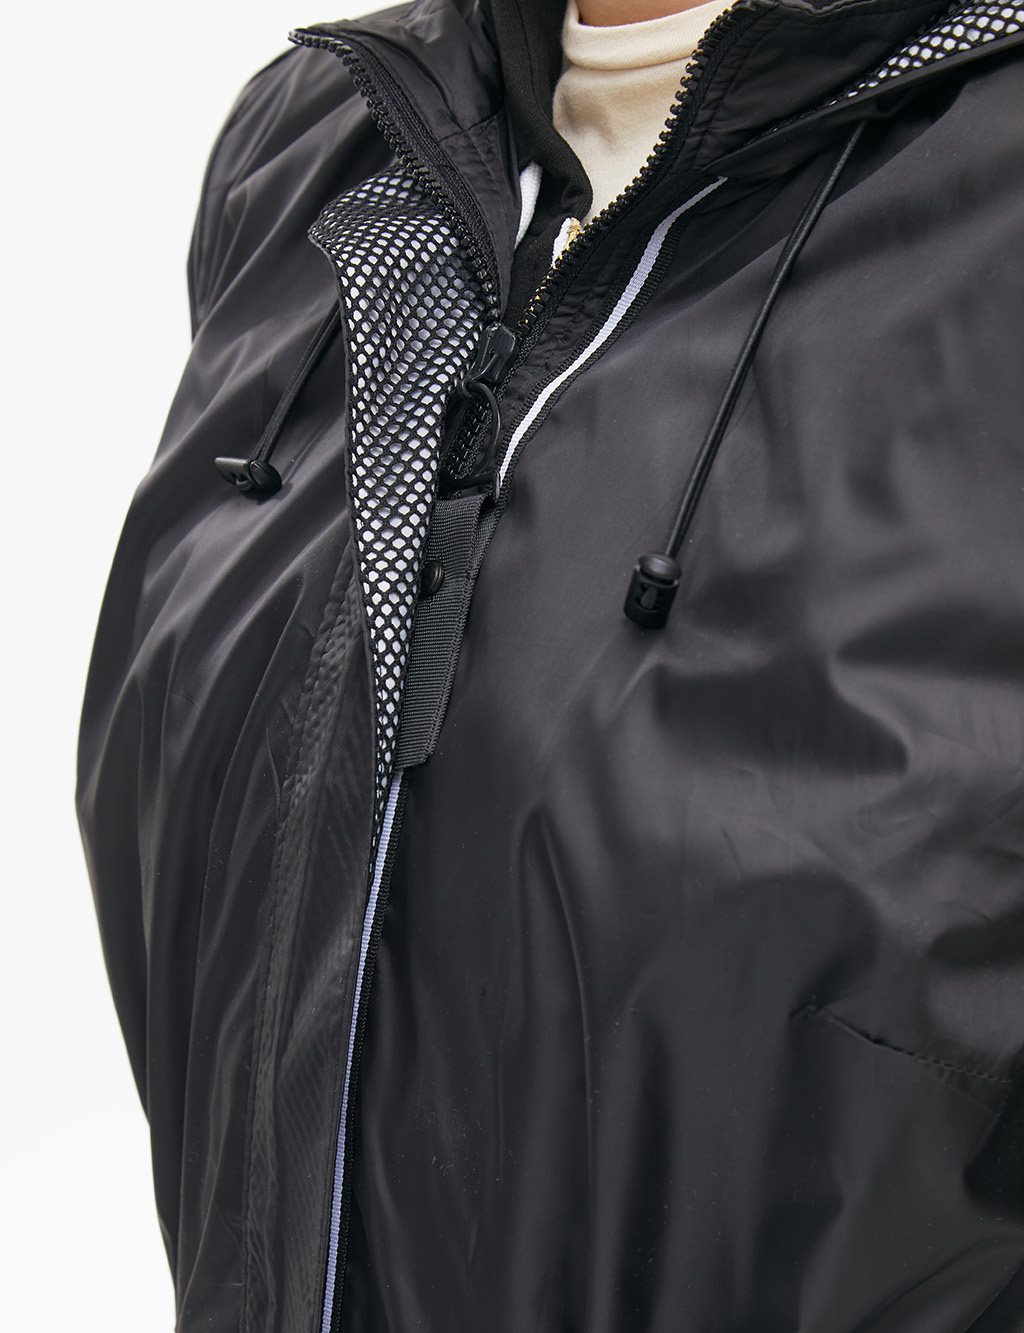 Pleated Hooded Trench Coat Black